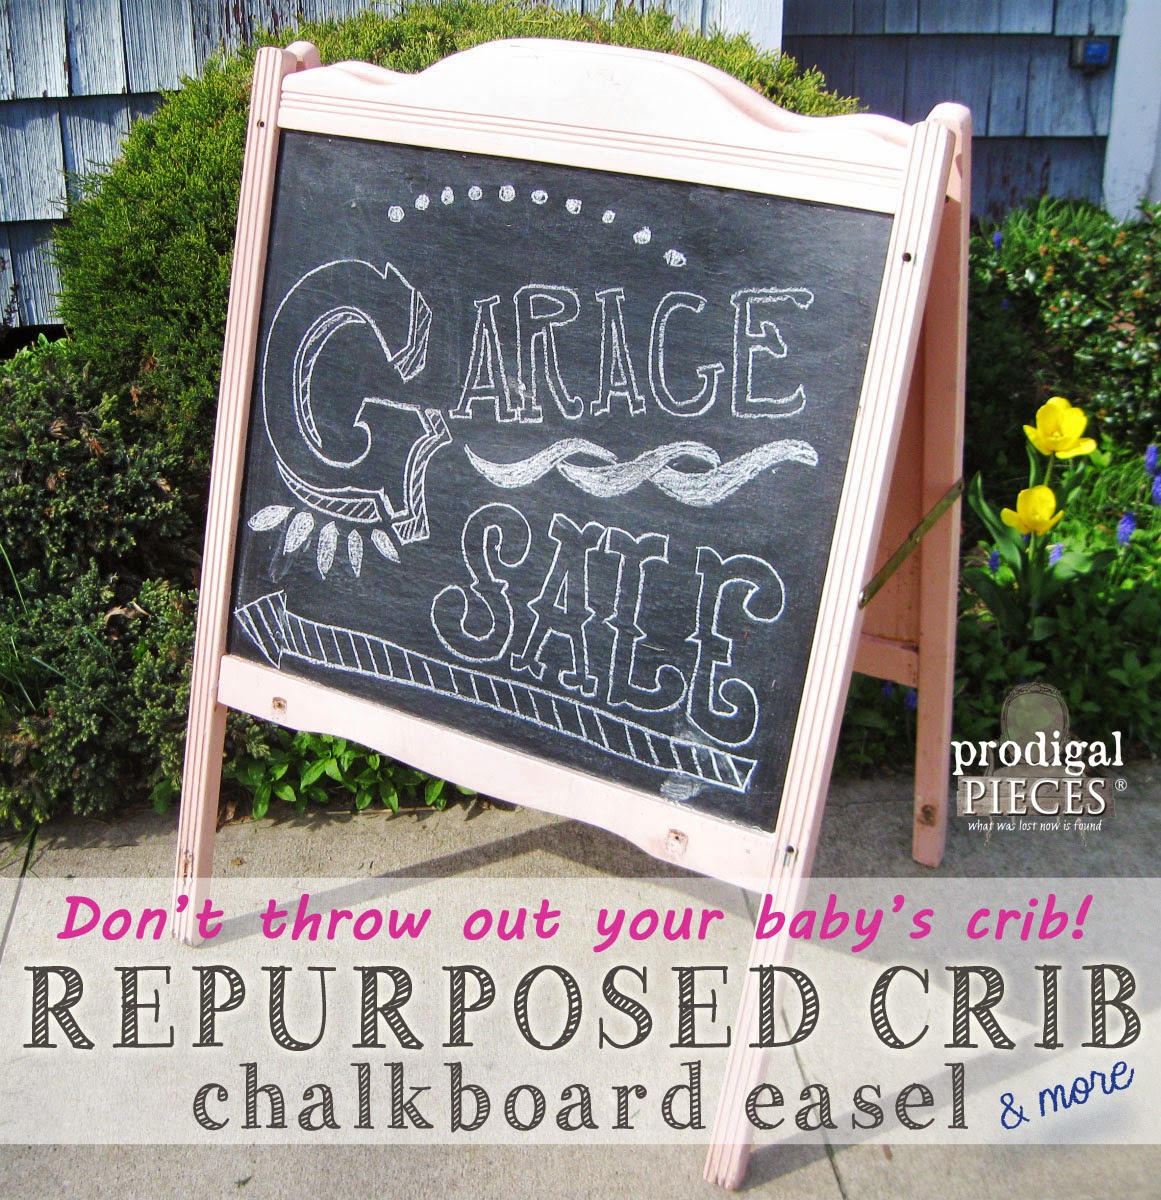 Don't Throw Out Your Baby's Crib! Repurpose It For Garden, Storage, or a Chalkboard Easel by Prodigal Pieces | www.prodigalpieces.com